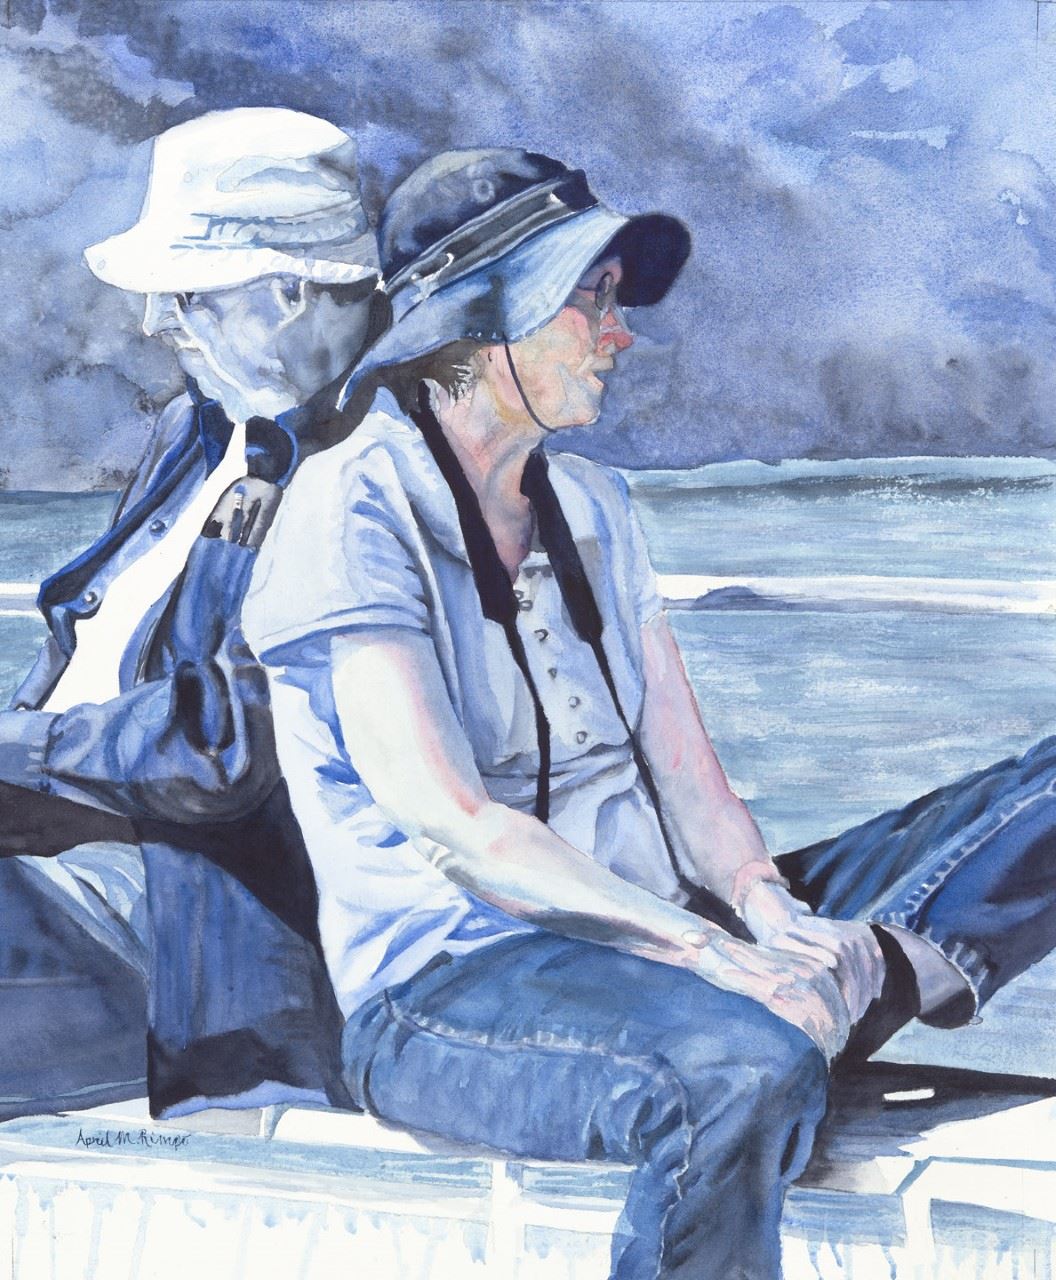 Watermedia painting by A. Rimpo, a woman in a hat on the beach, back to back with a man. The man is painted in shades of blue and appears faded.